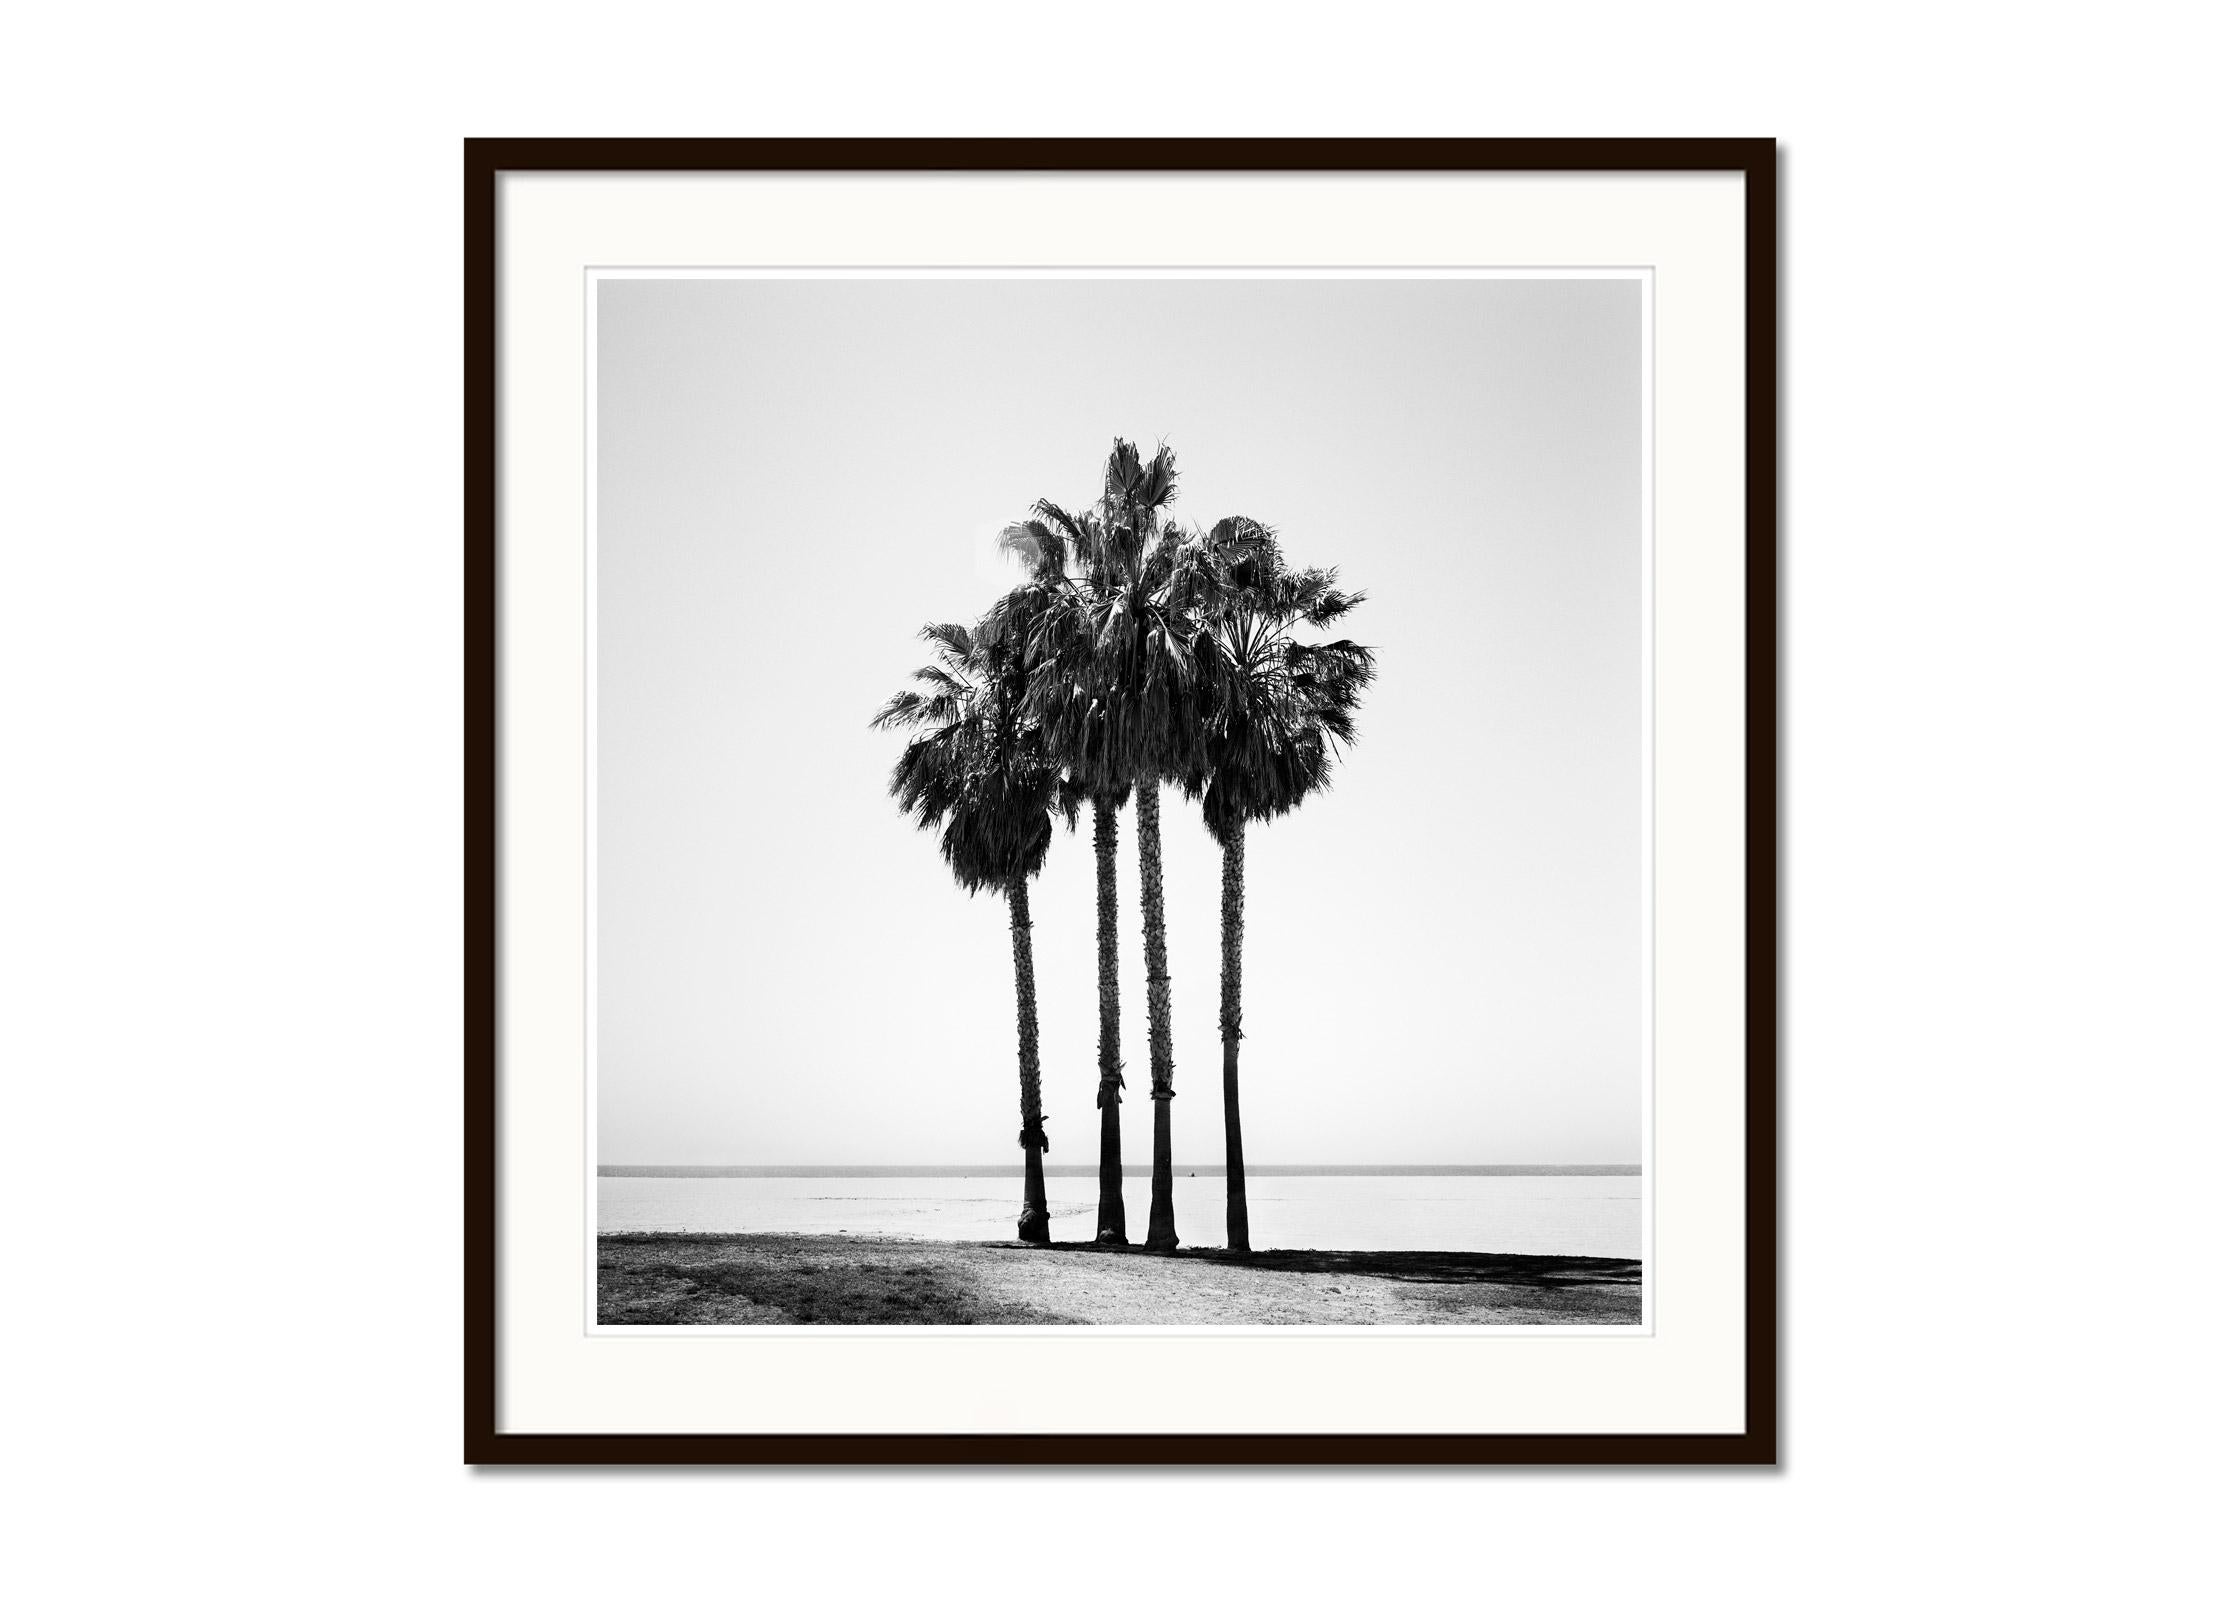 Four Palms, Venice Beach, California, black and white photography, landscape - Gray Landscape Photograph by Gerald Berghammer